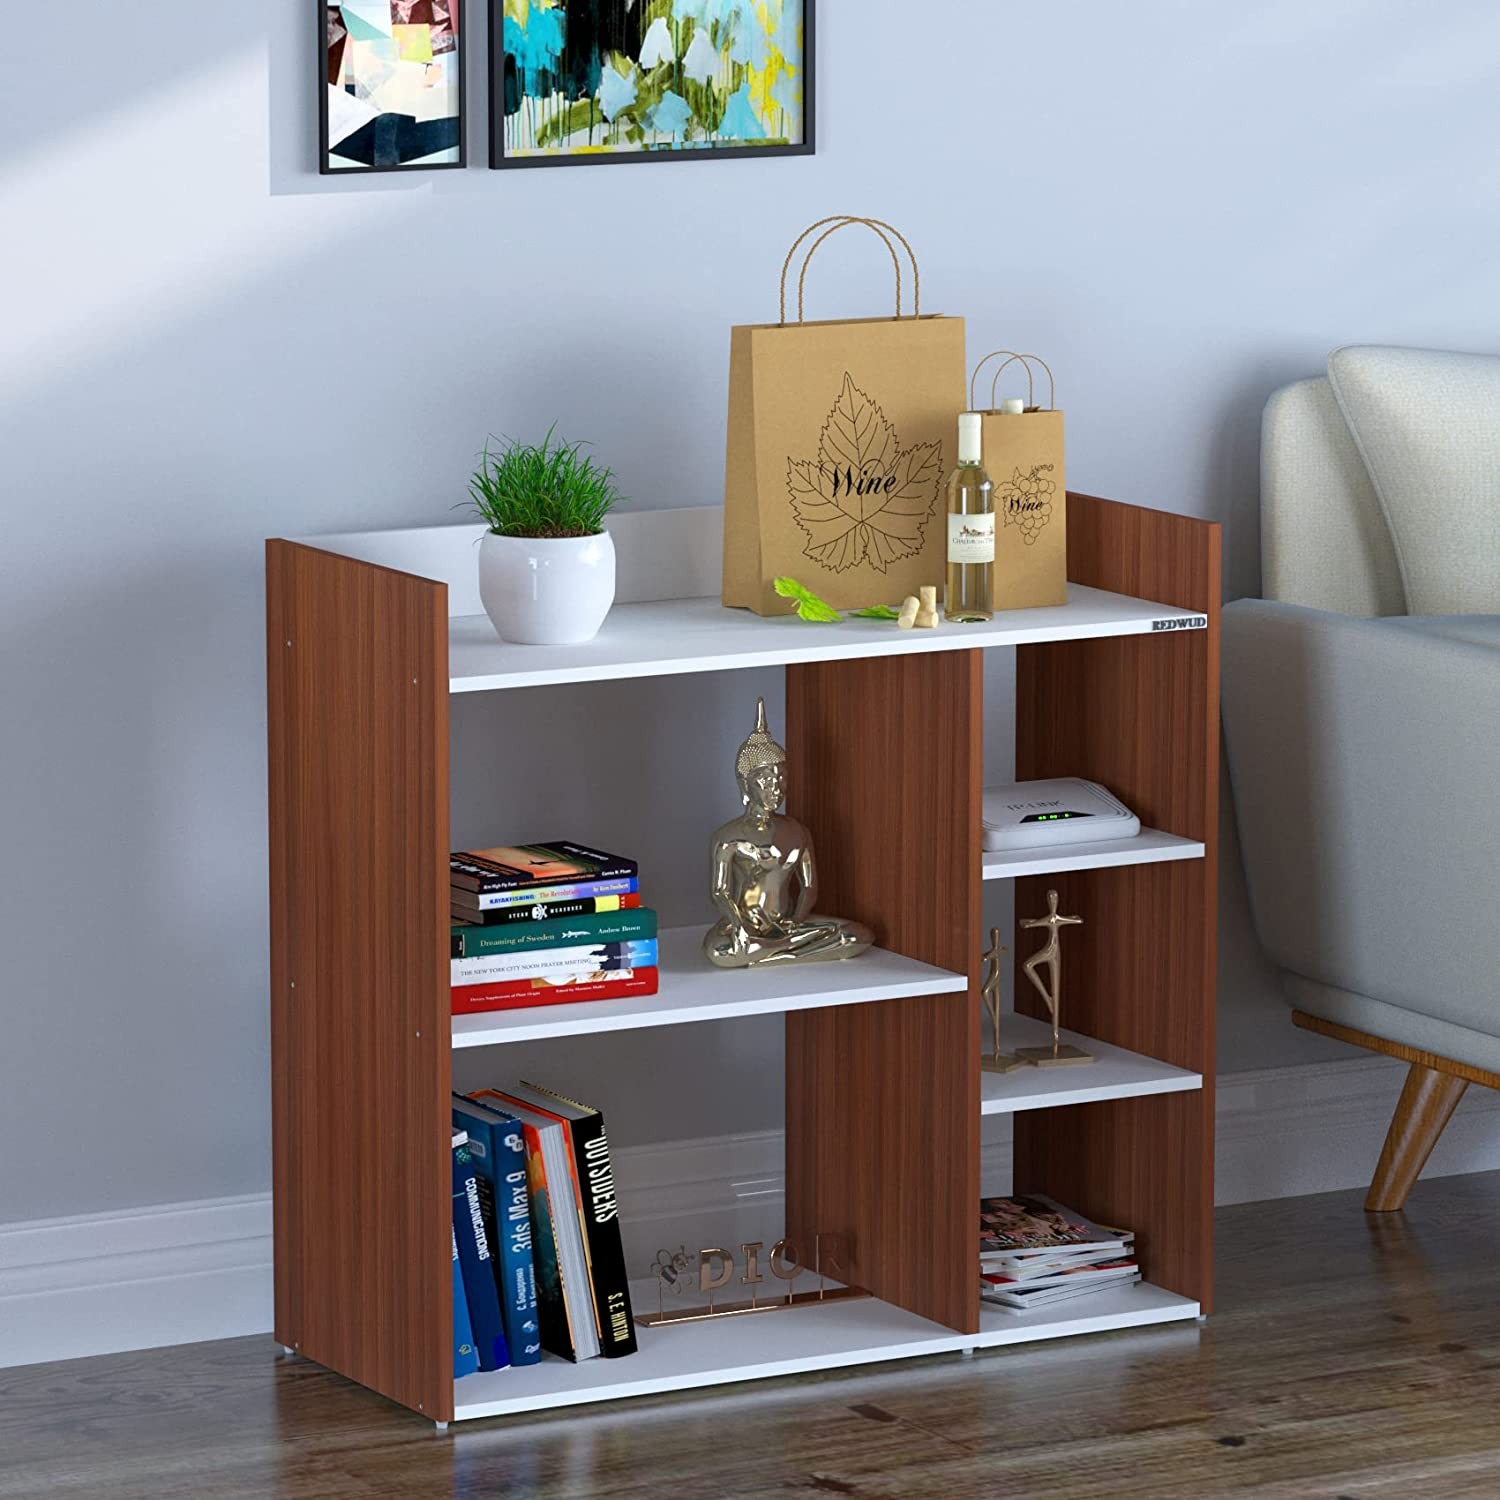 sandy-engineered-wood-bedside-table-end-table-walnutwhite-rd-sandy-wntwt